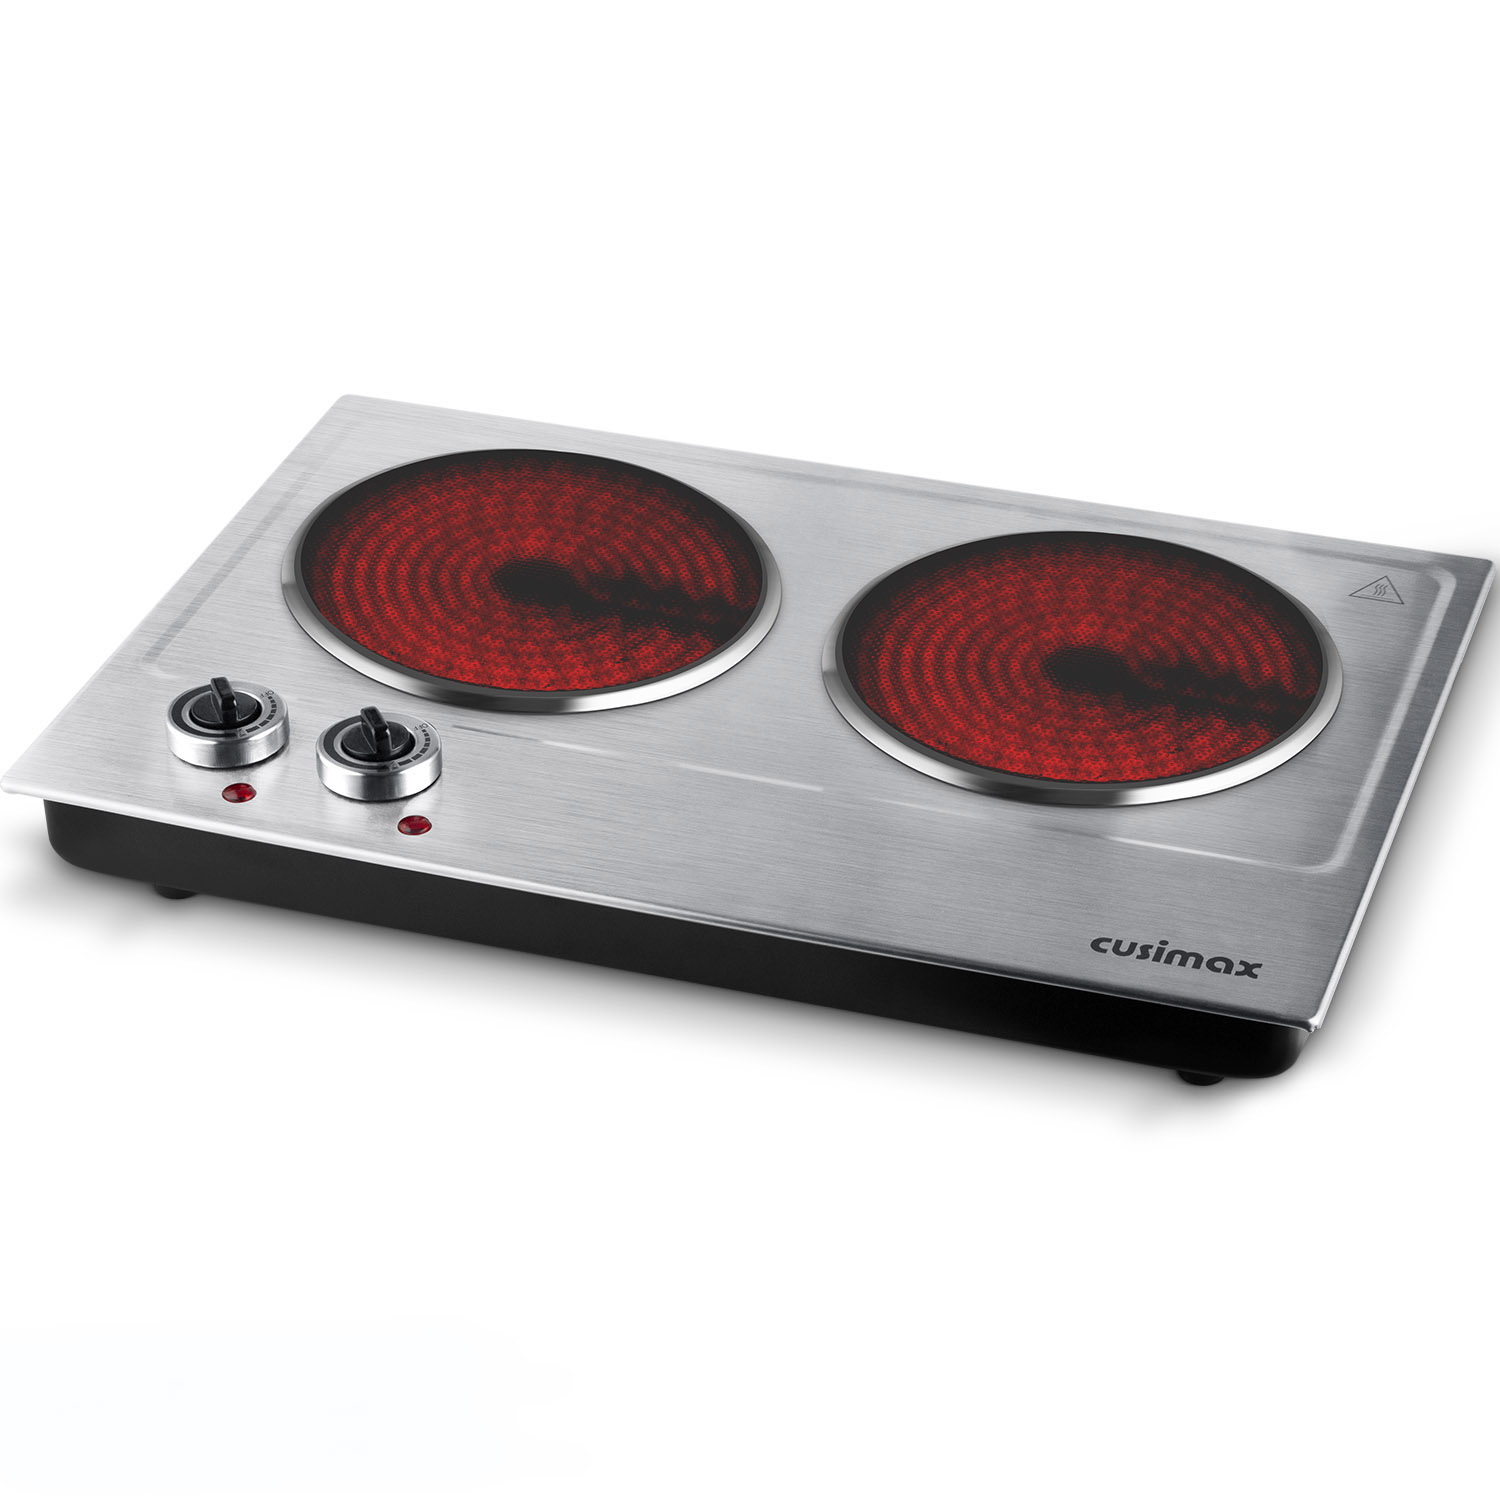 YONGSTYLE Double Hot Plate Electric Ceramic plate,1800W Infrared